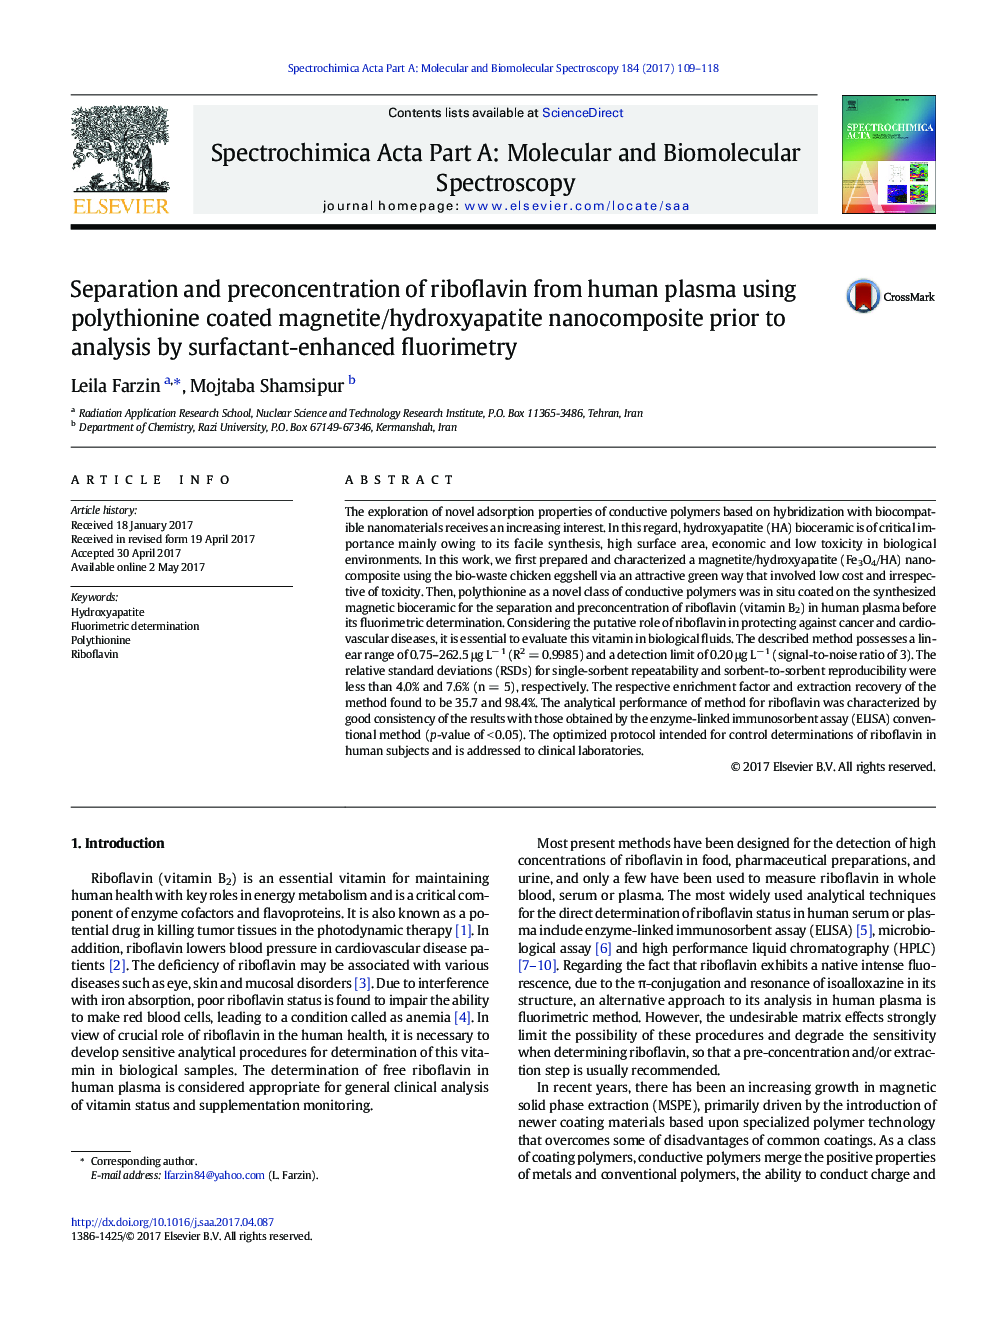 Separation and preconcentration of riboflavin from human plasma using polythionine coated magnetite/hydroxyapatite nanocomposite prior to analysis by surfactant-enhanced fluorimetry